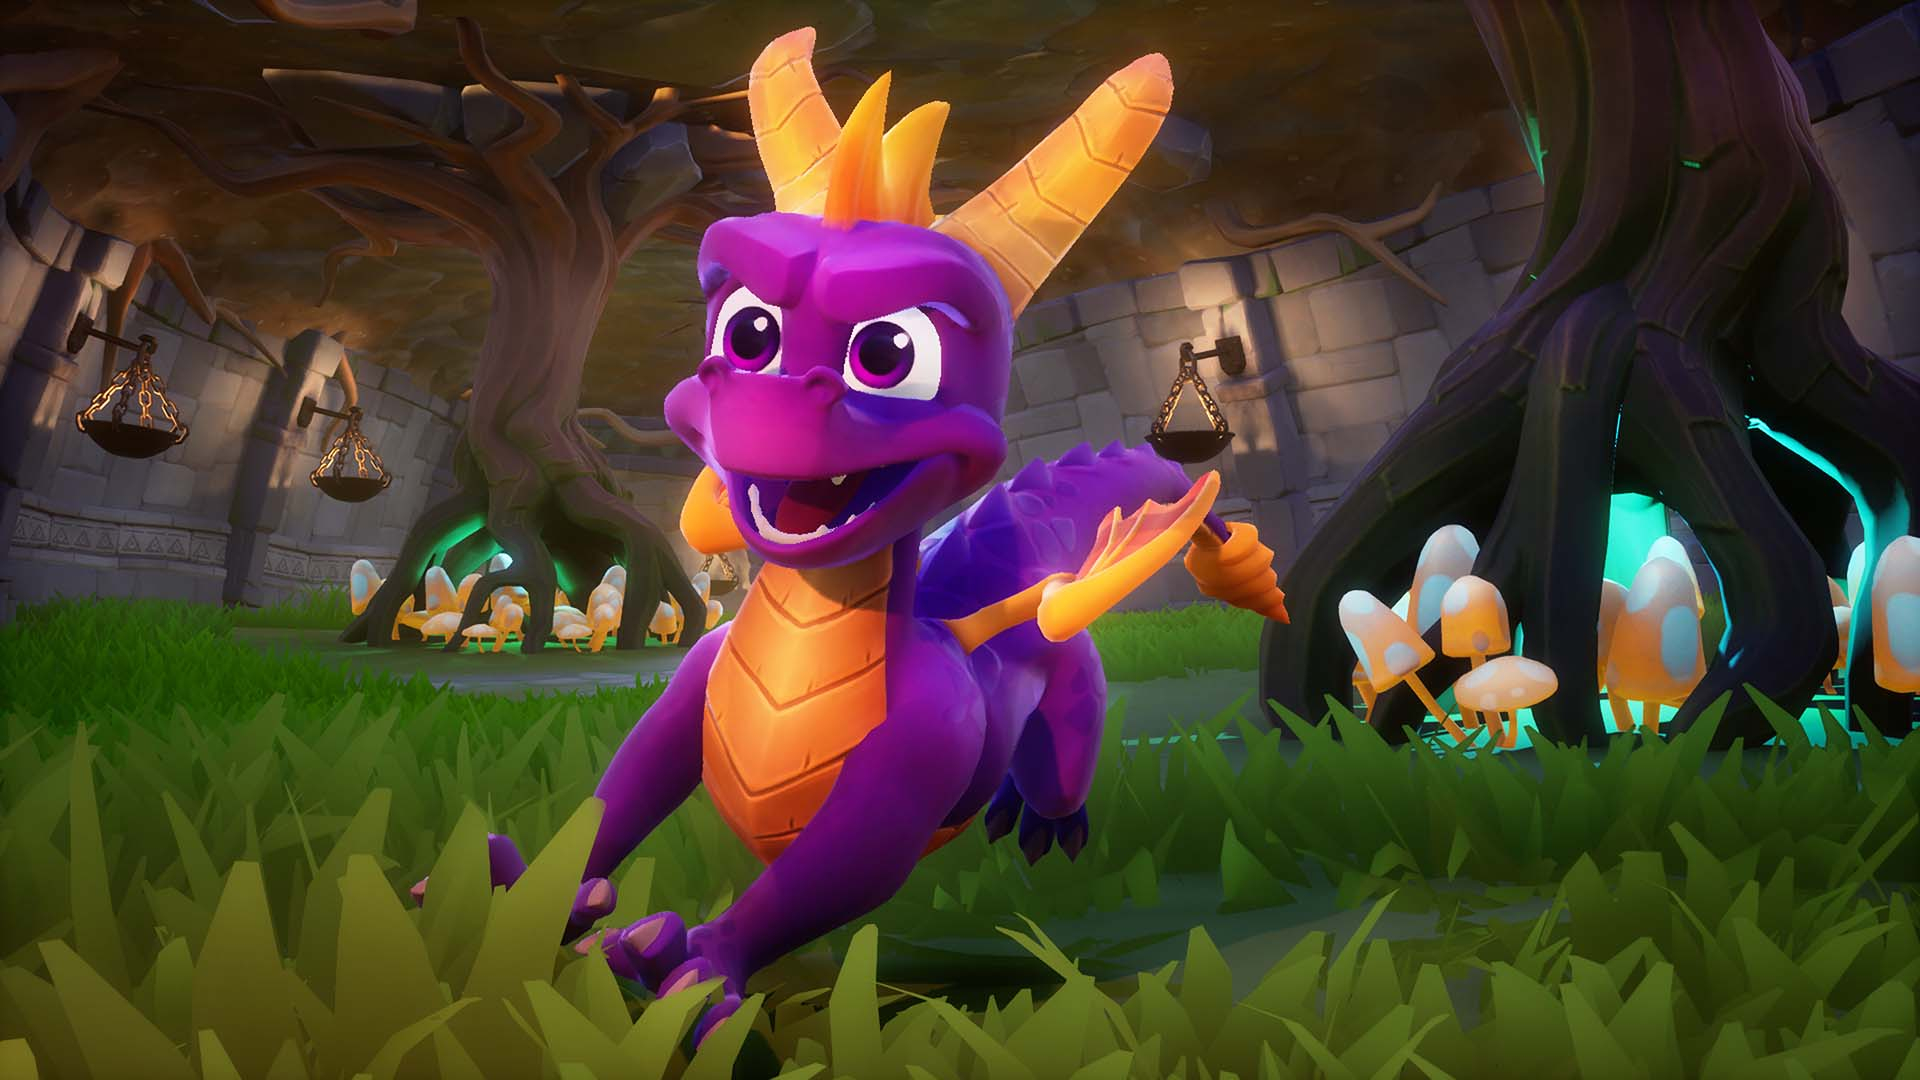 1920x1080 Spyro Reignited Trilogy Wallpapers for Your Browser &acirc;&#128;&#147; Mega Themes